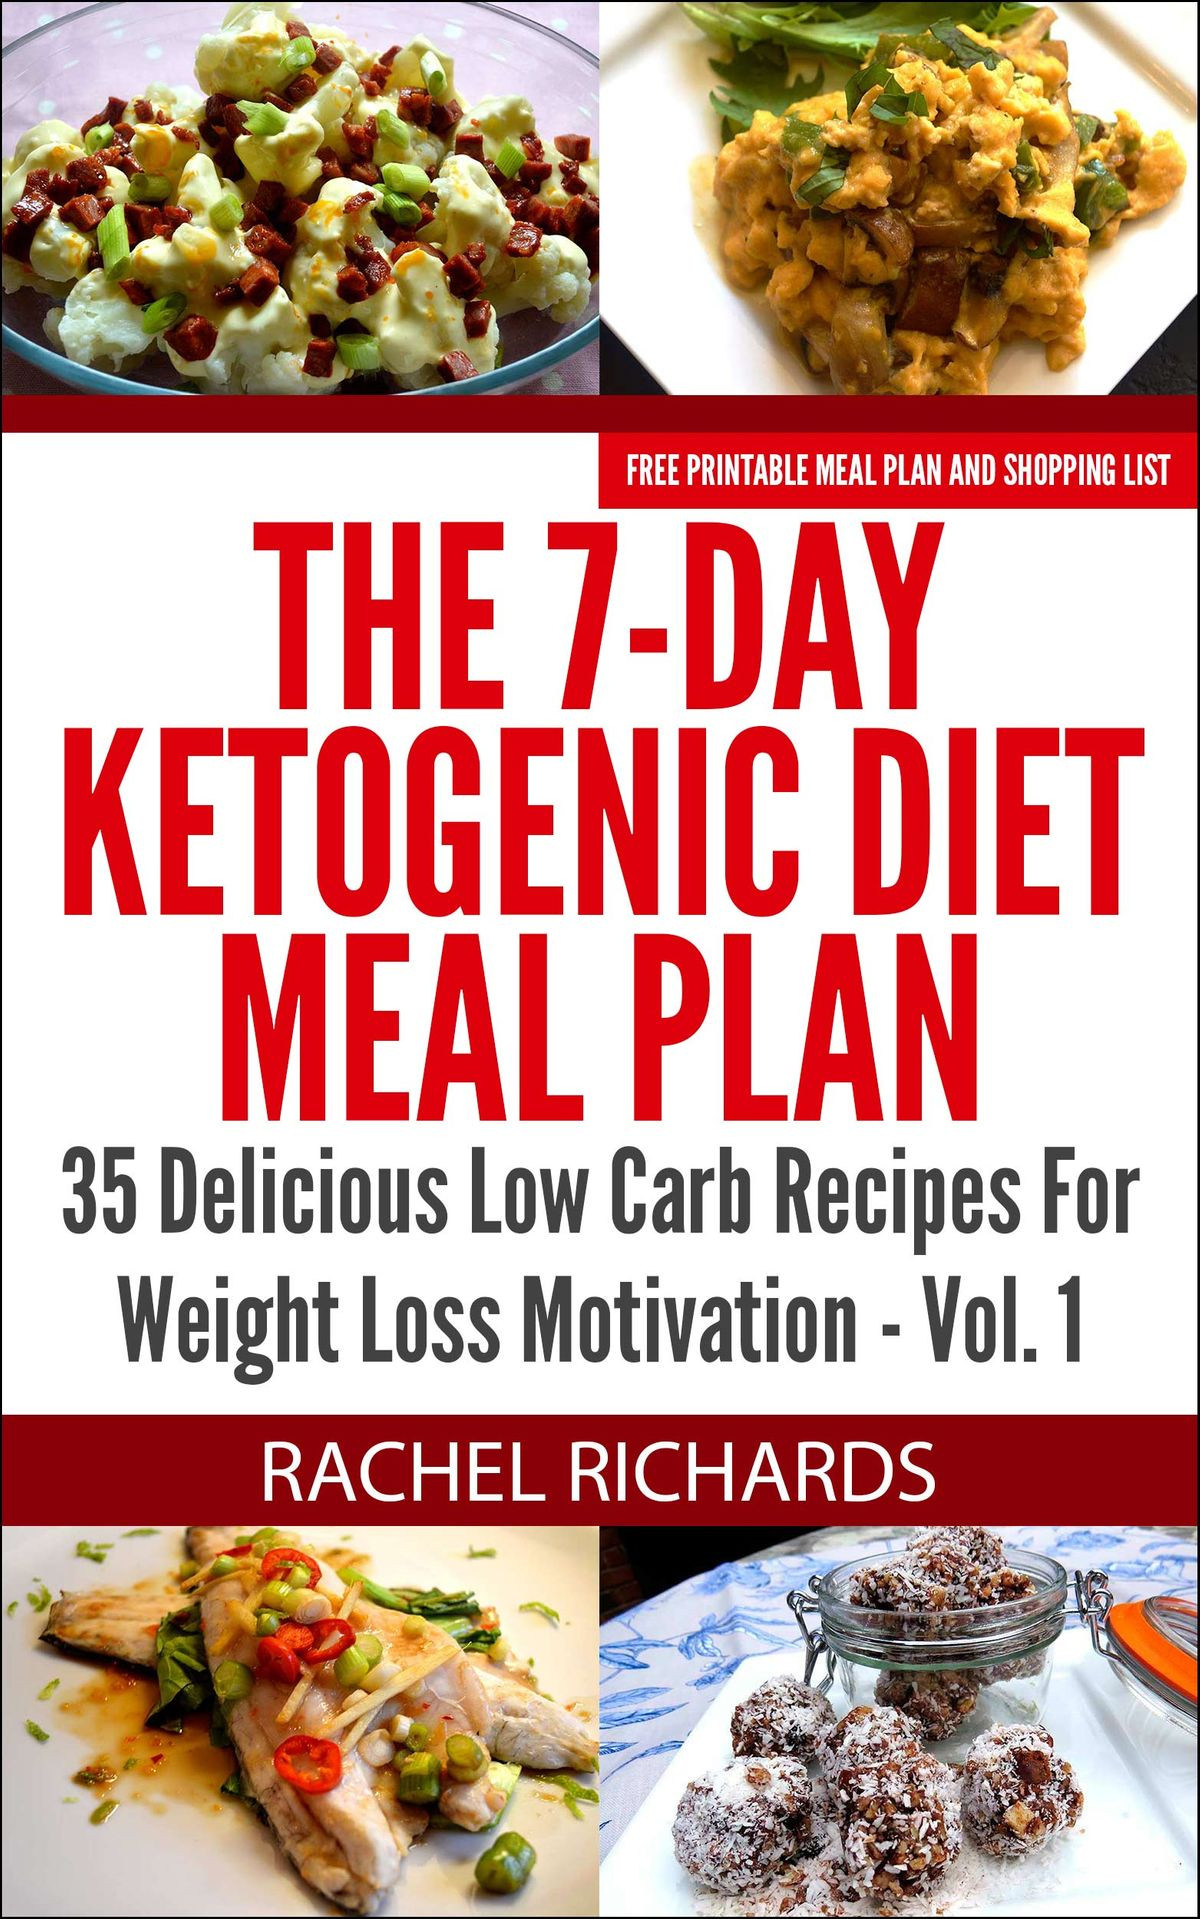 Low Carb Diet Motivation
 The 7 Day Ketogenic Diet Meal Plan 35 Delicious Low Carb